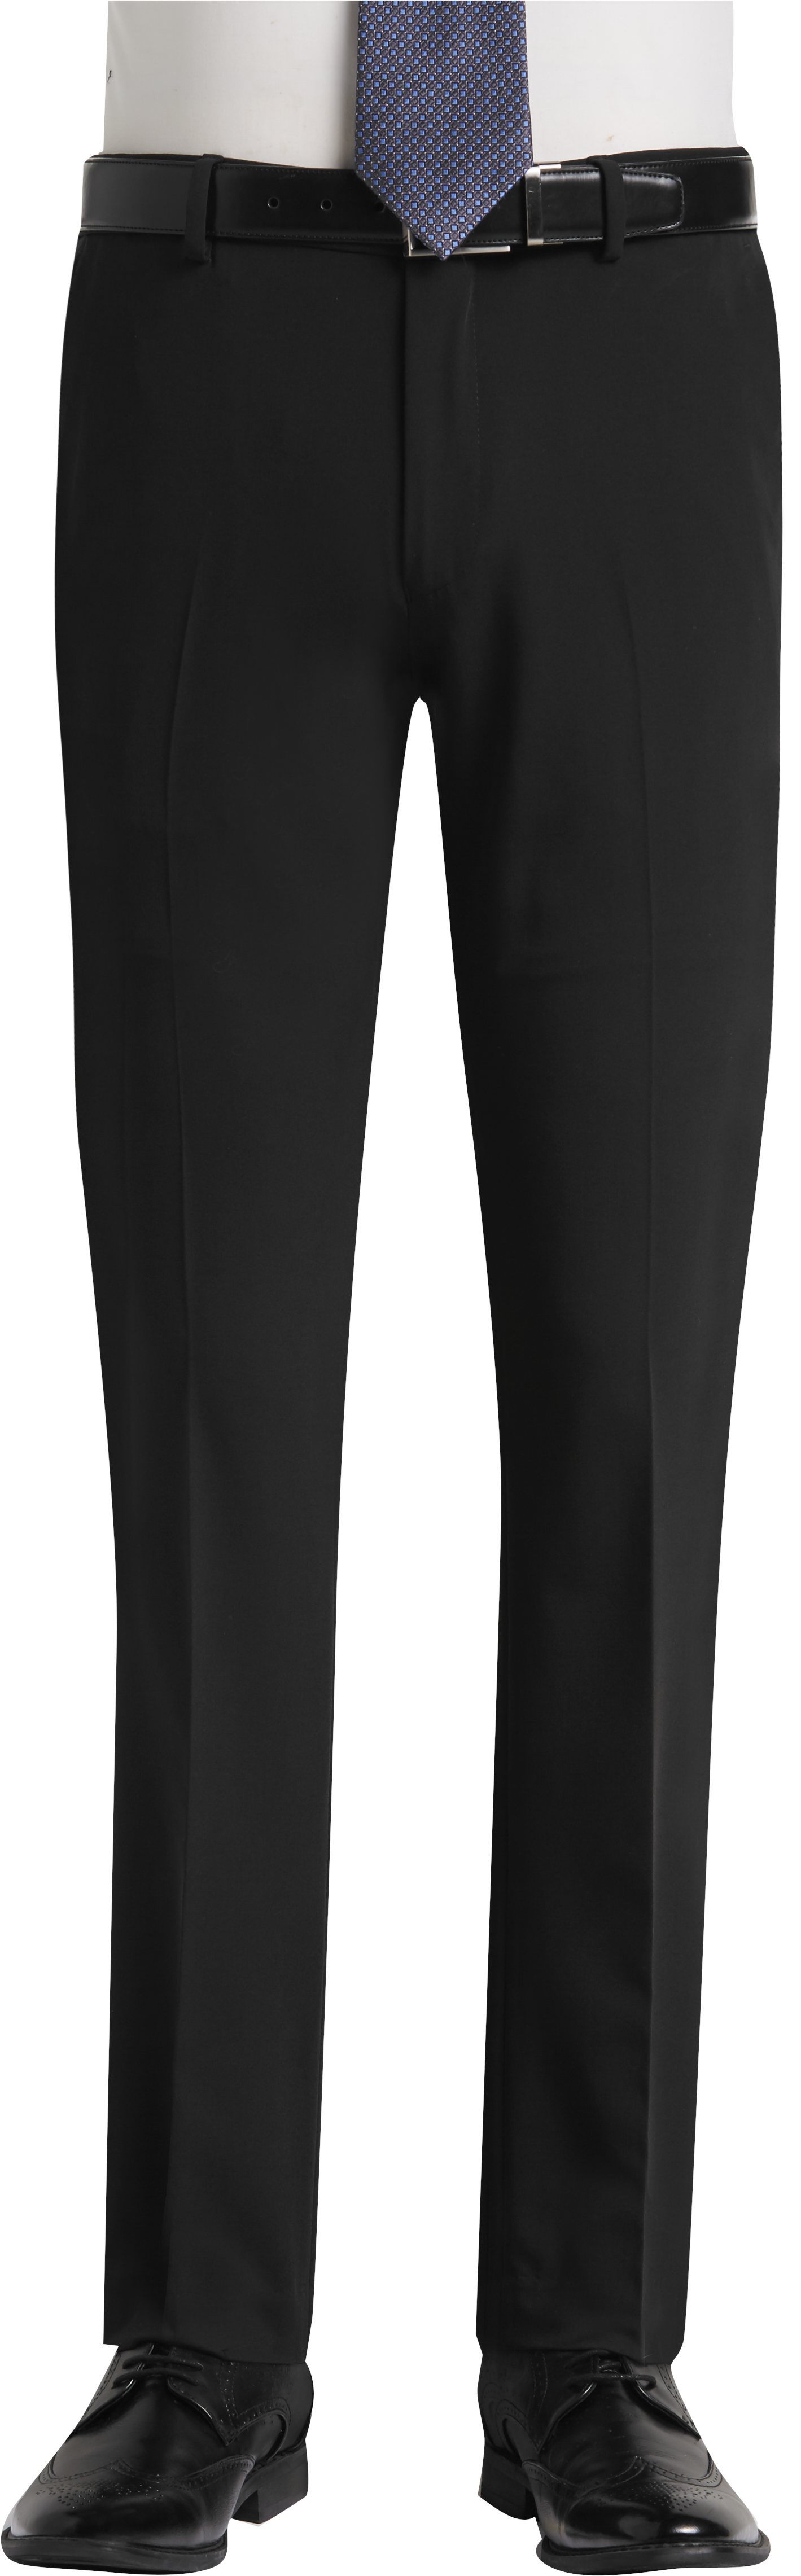 dress pants with casual shoes